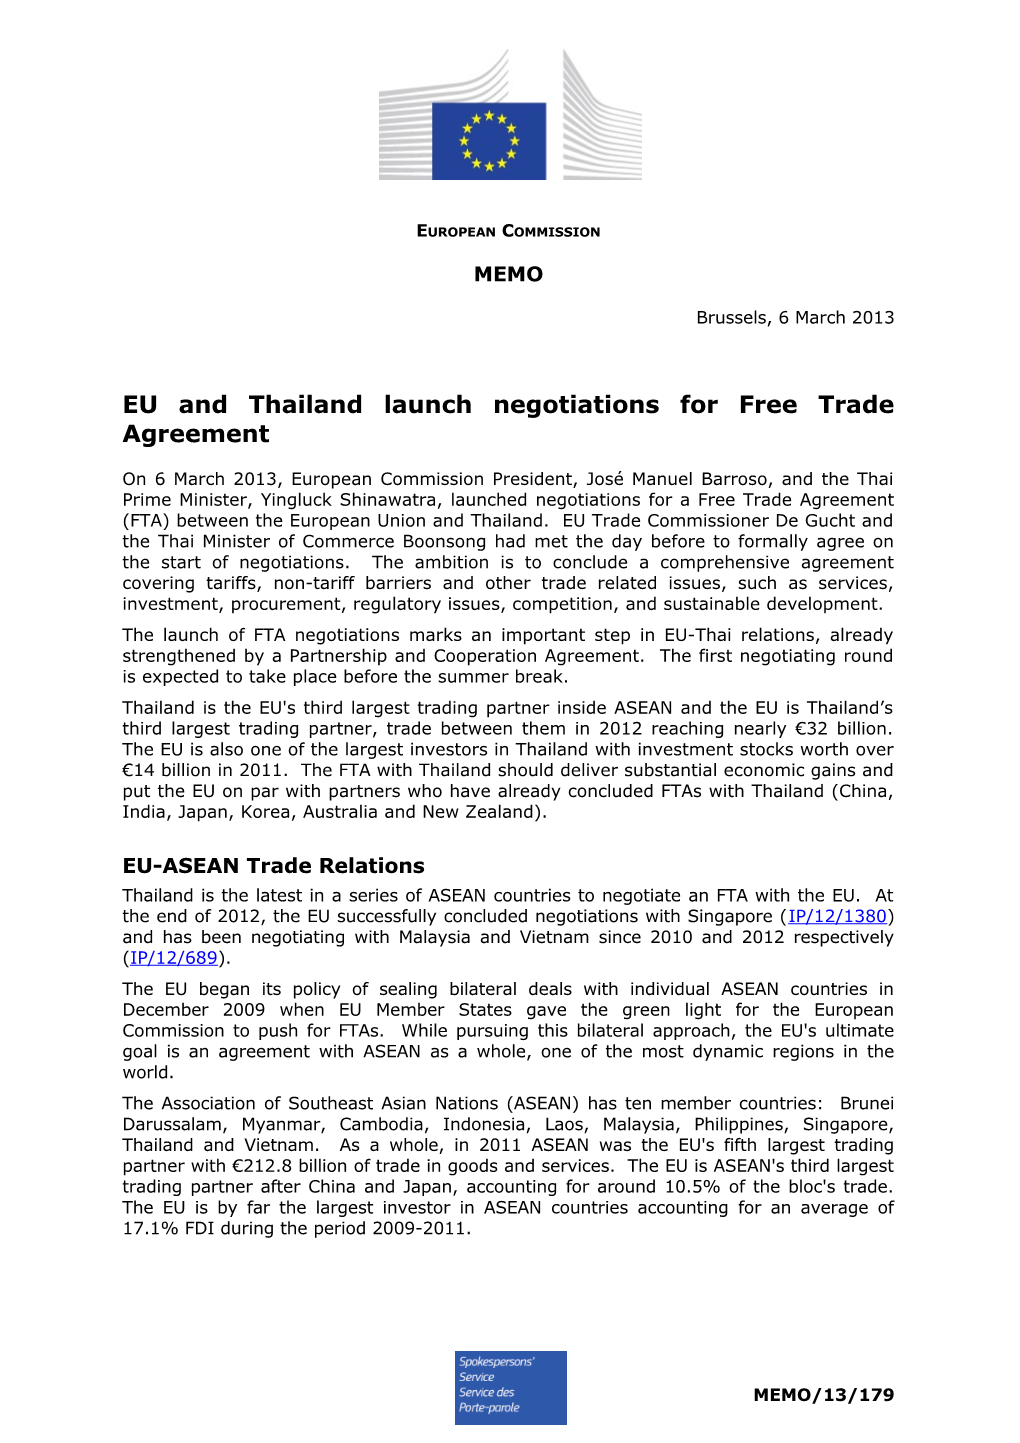 EU and Thailand Launch Negotiations for Free Trade Agreement